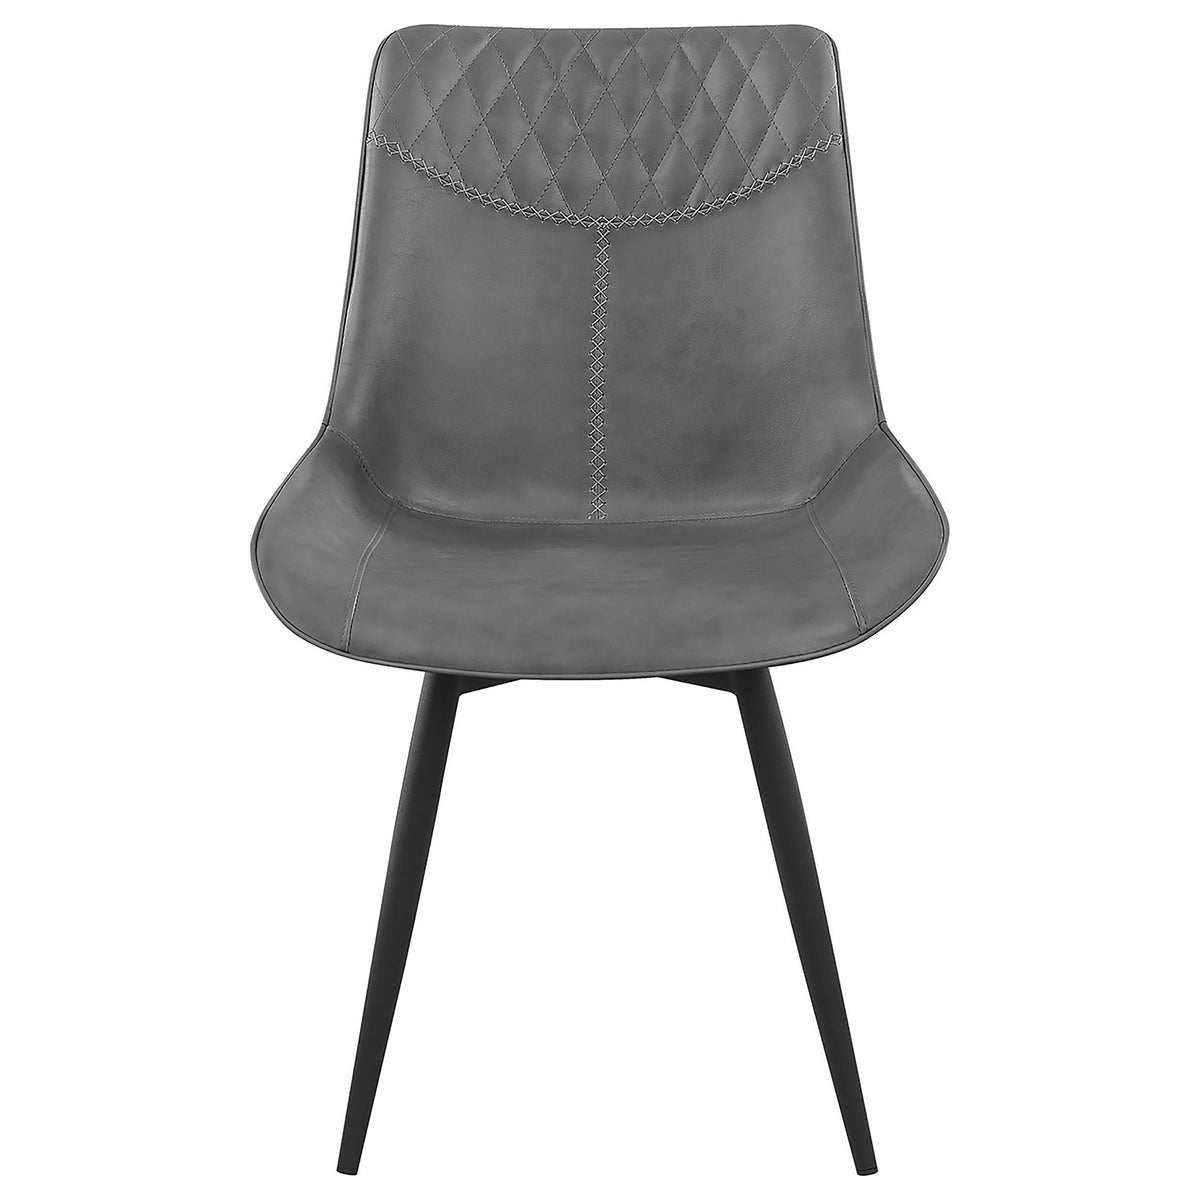 Brassie Upholstered Side Chairs Grey (Set of 2)  Las Vegas Furniture Stores